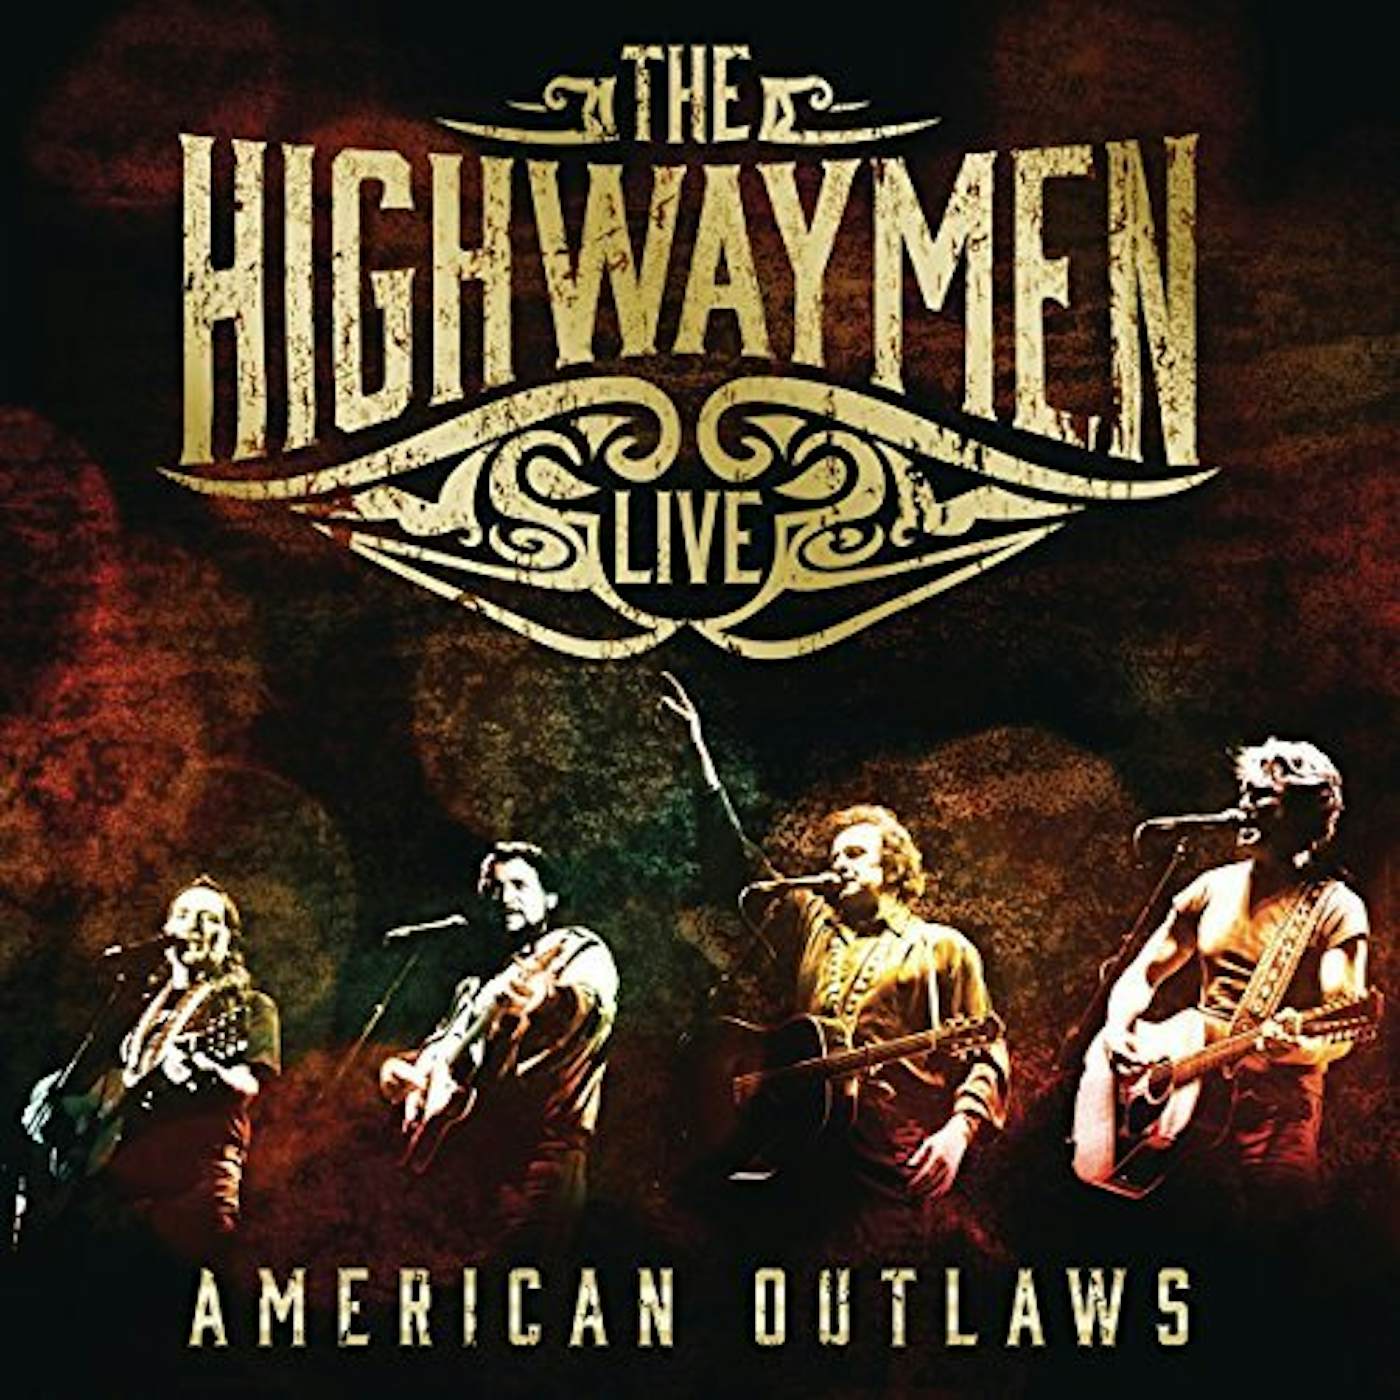 The Highwaymen Live: American Outlaws (3CD/Blu-Ray) Box Set